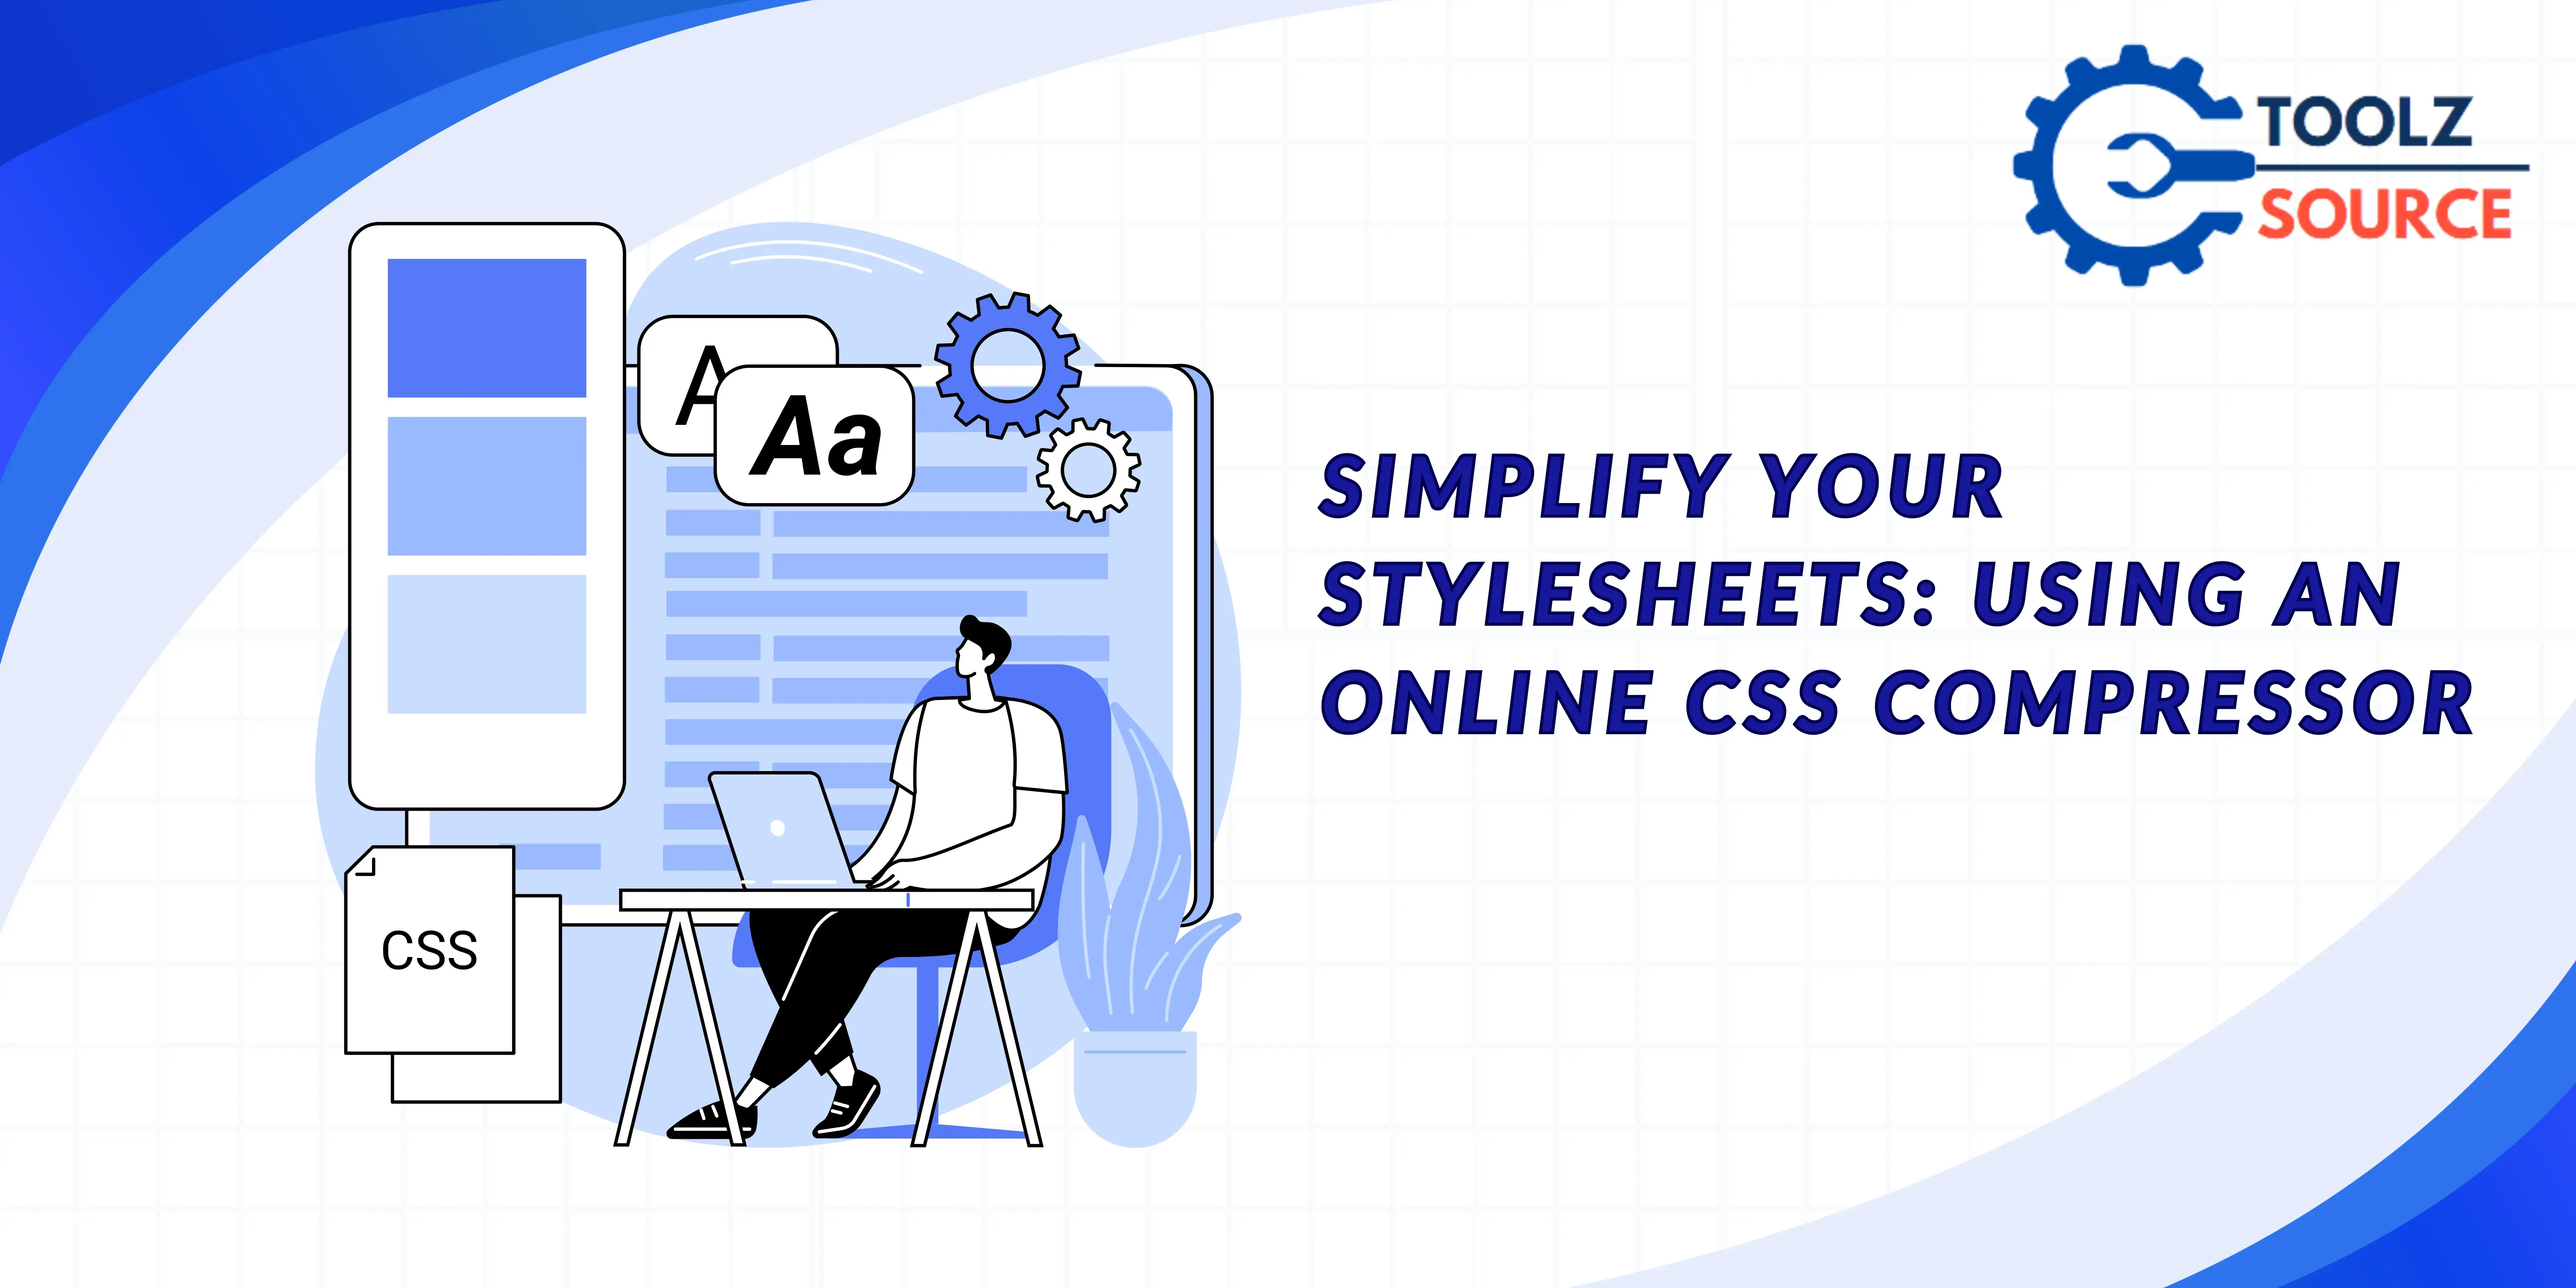 Simplify Your Stylesheets: Using an Online CSS Compressor